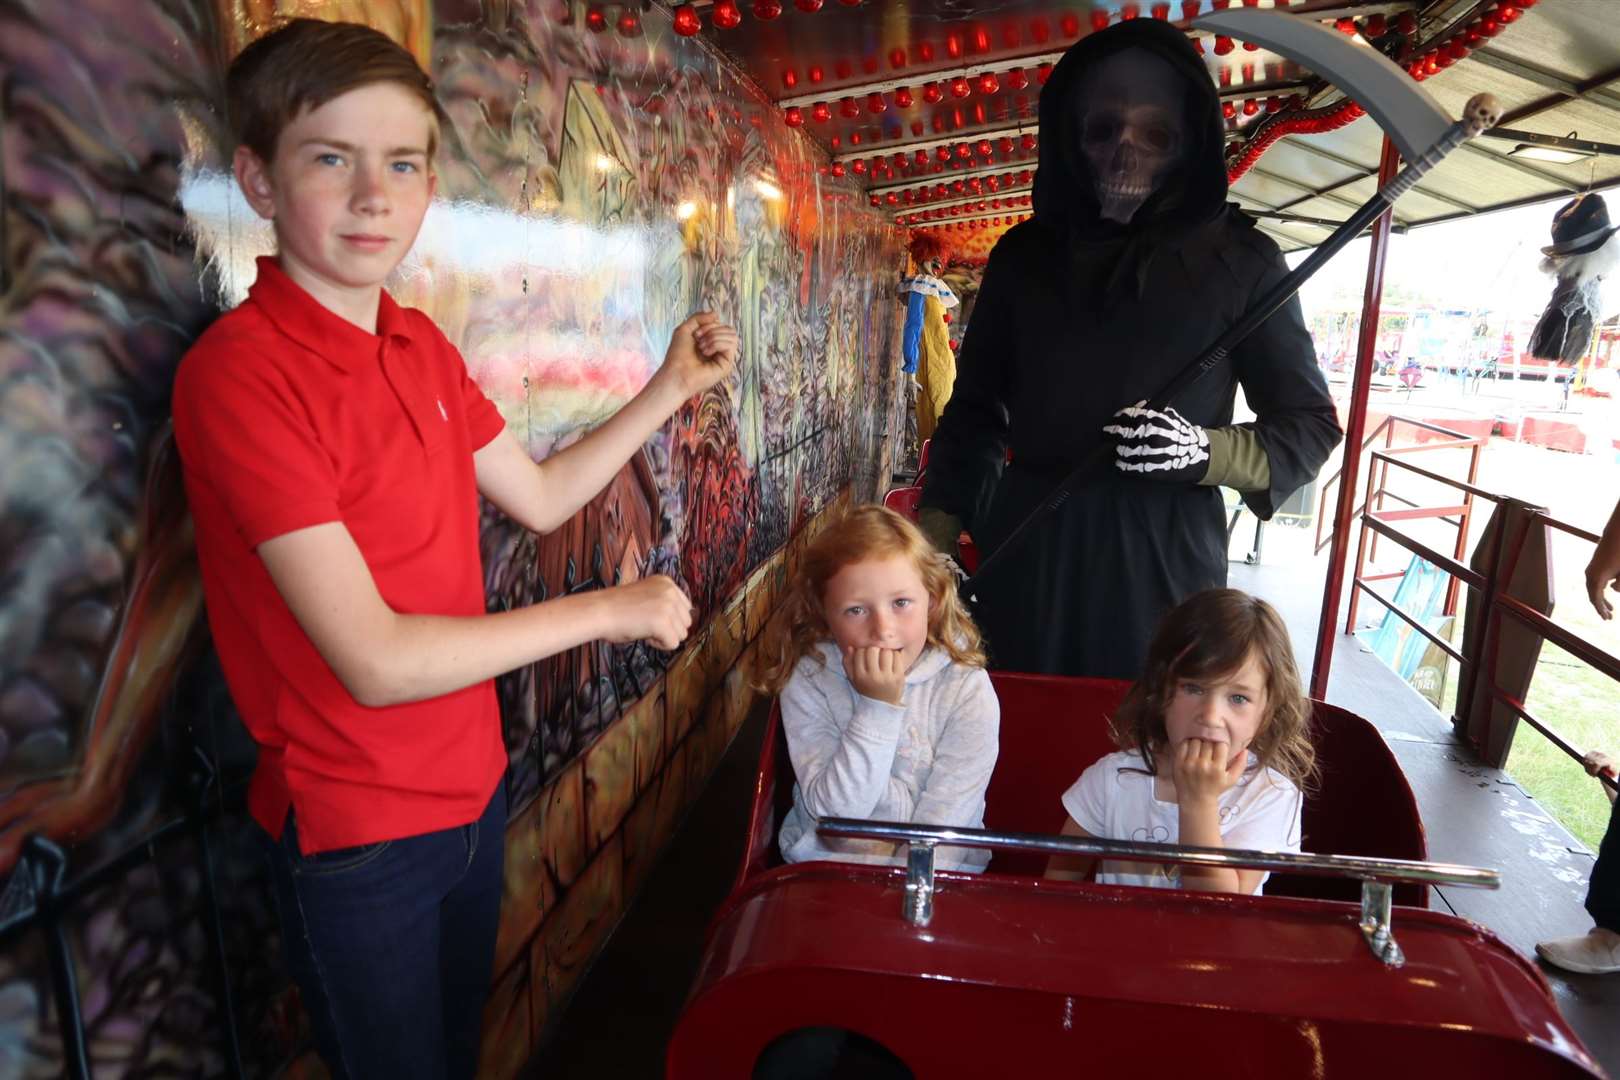 Death stare from the Grim Reaper Oscar Bennett, 17, from Warden Bay at the Graveyard Express ghost train at Leysdown, Sheppey, watched by the train's station master Reece Brett, 12, and guinea pigs Darcey Christian, 6, and her cousin Crystal Christian, 4